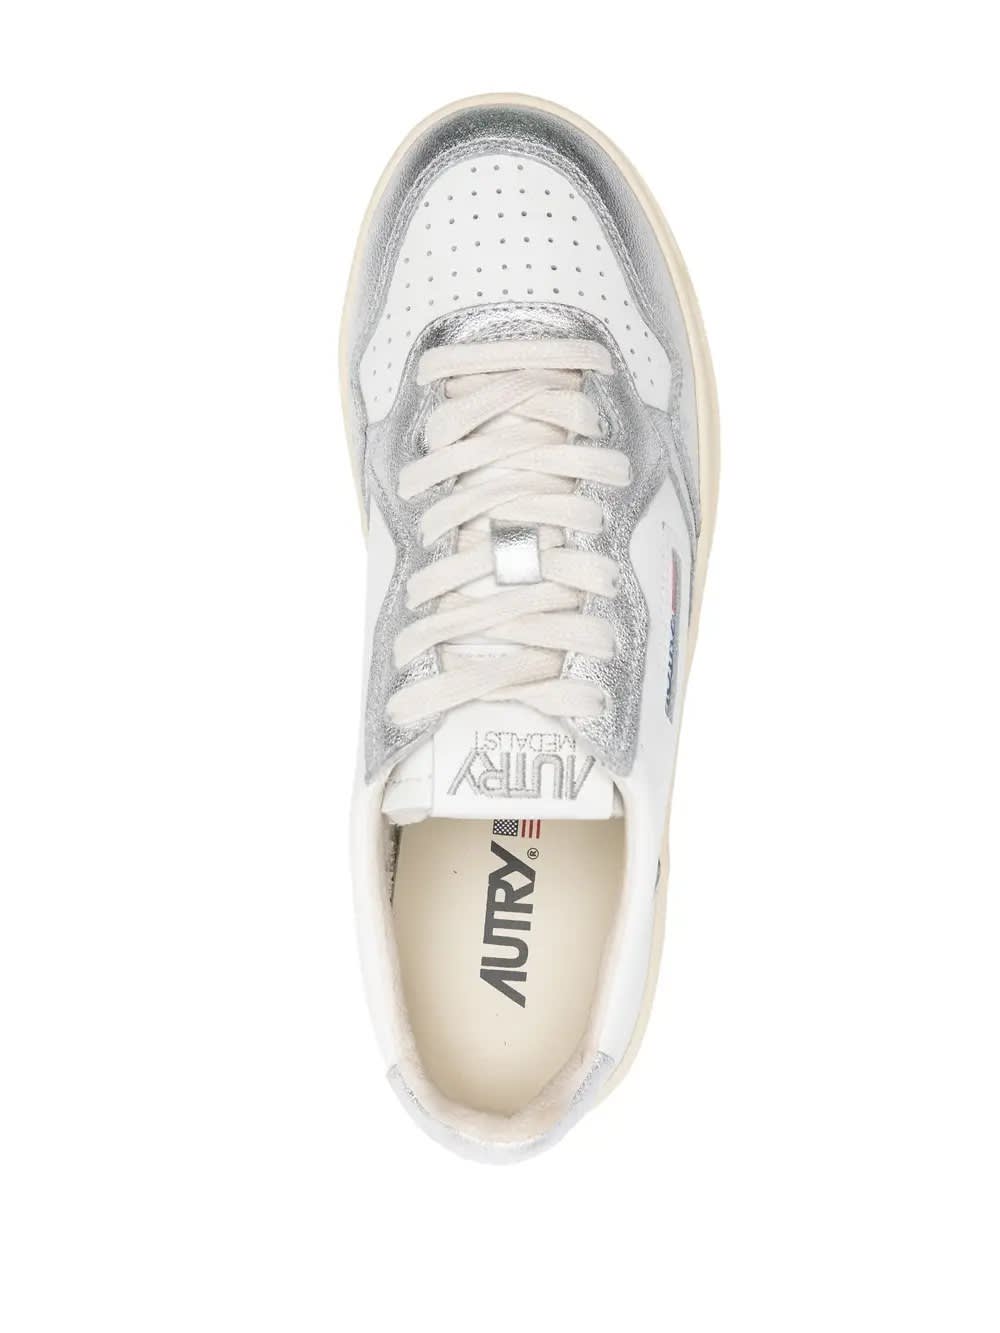 Shop Autry White And Silver Medalist Platform Low Sneakers